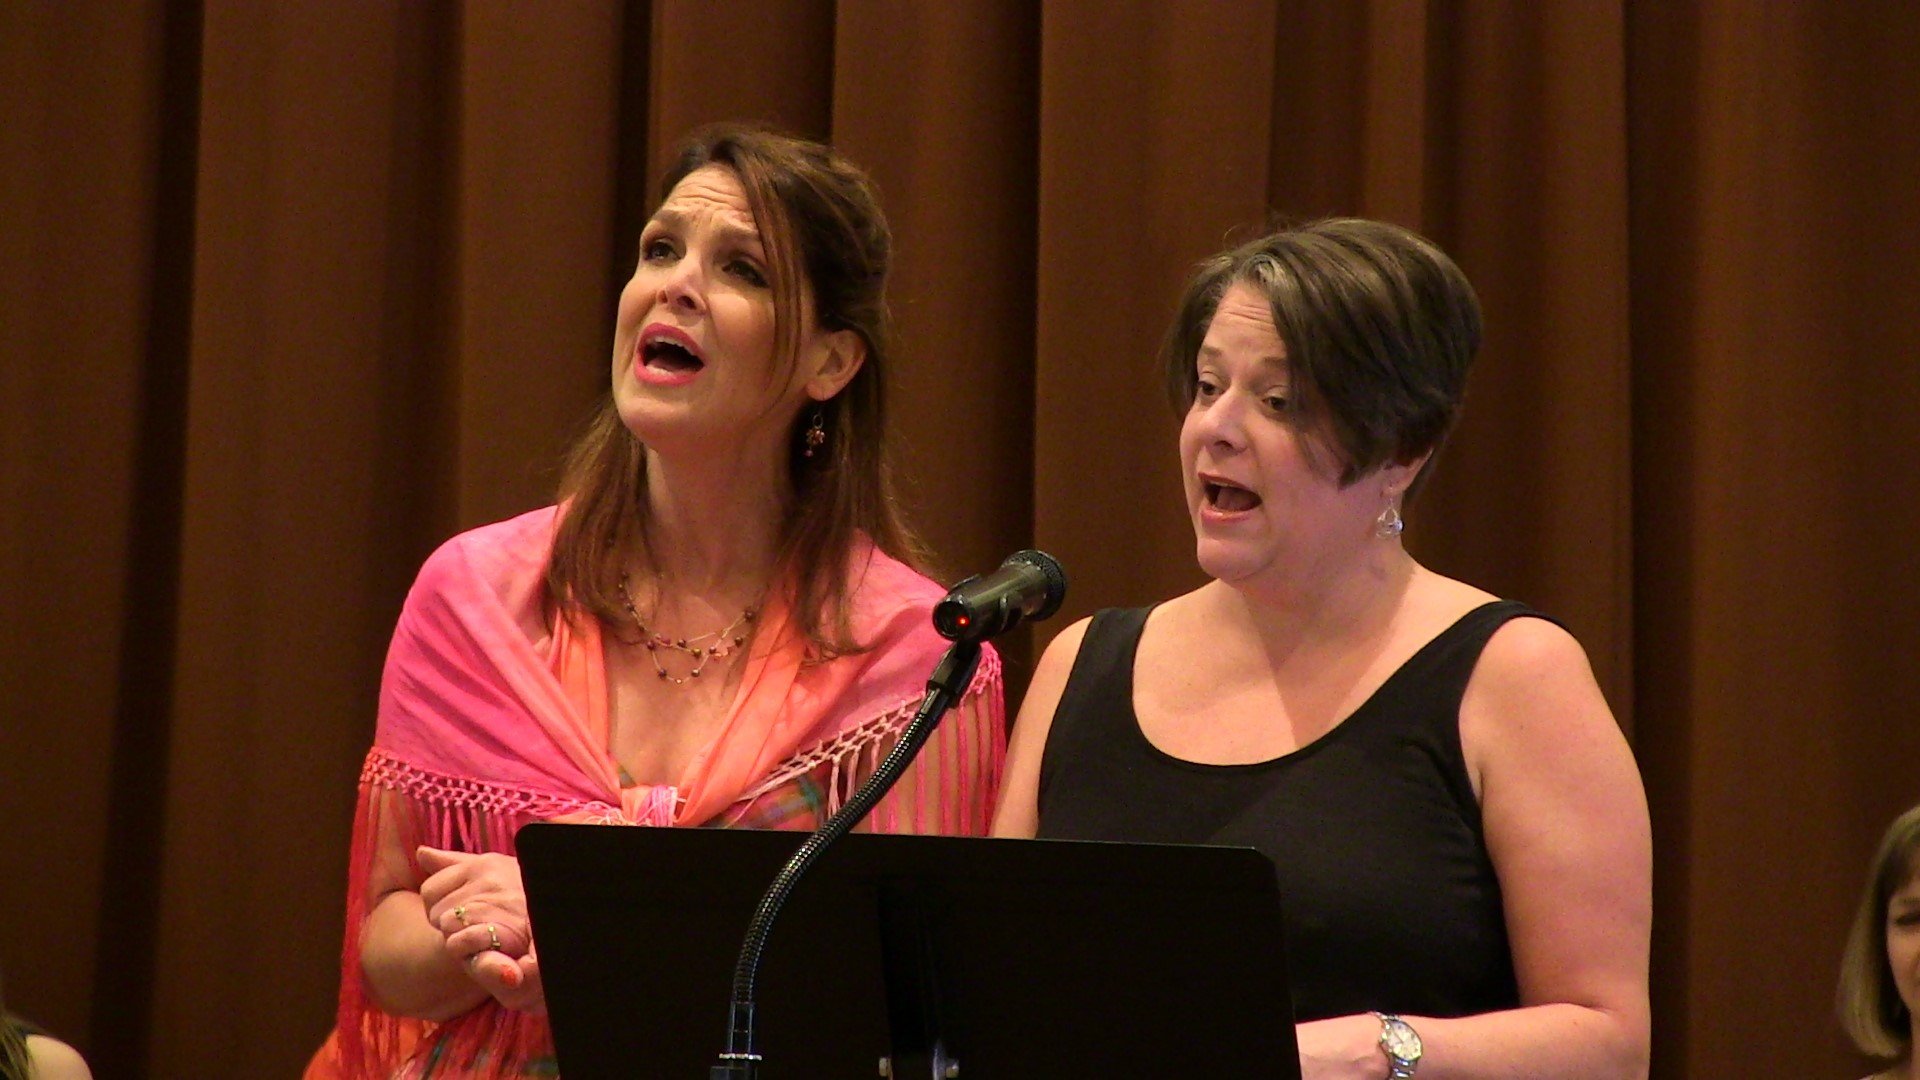 Angela and Jean performing duet - Animate Voice Studio